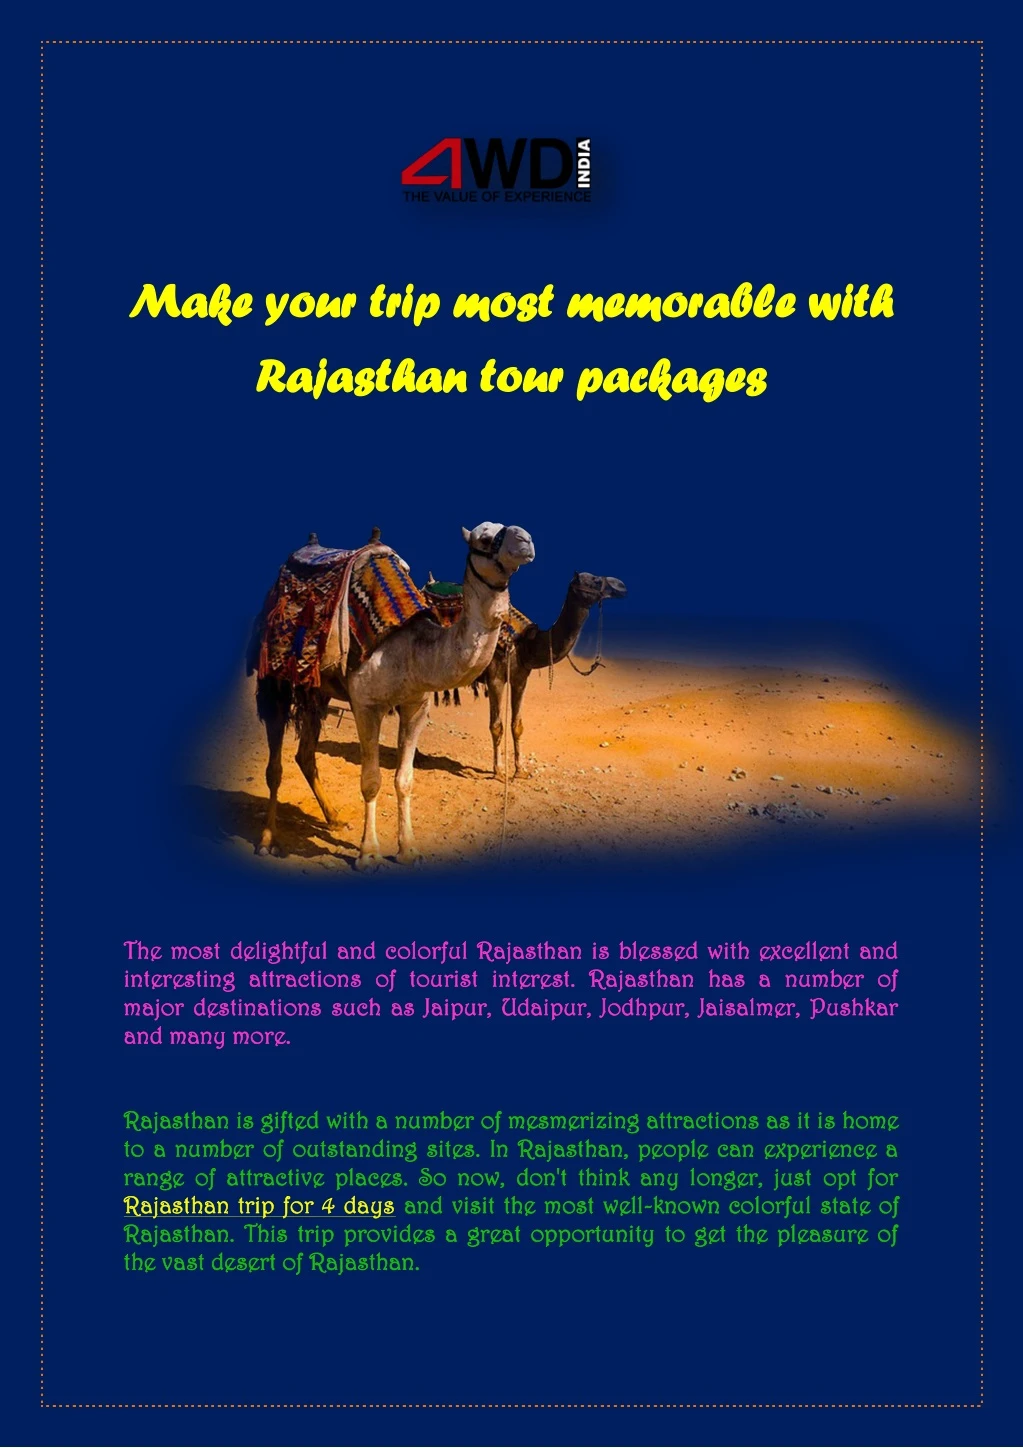 make your trip most memorable with make your trip